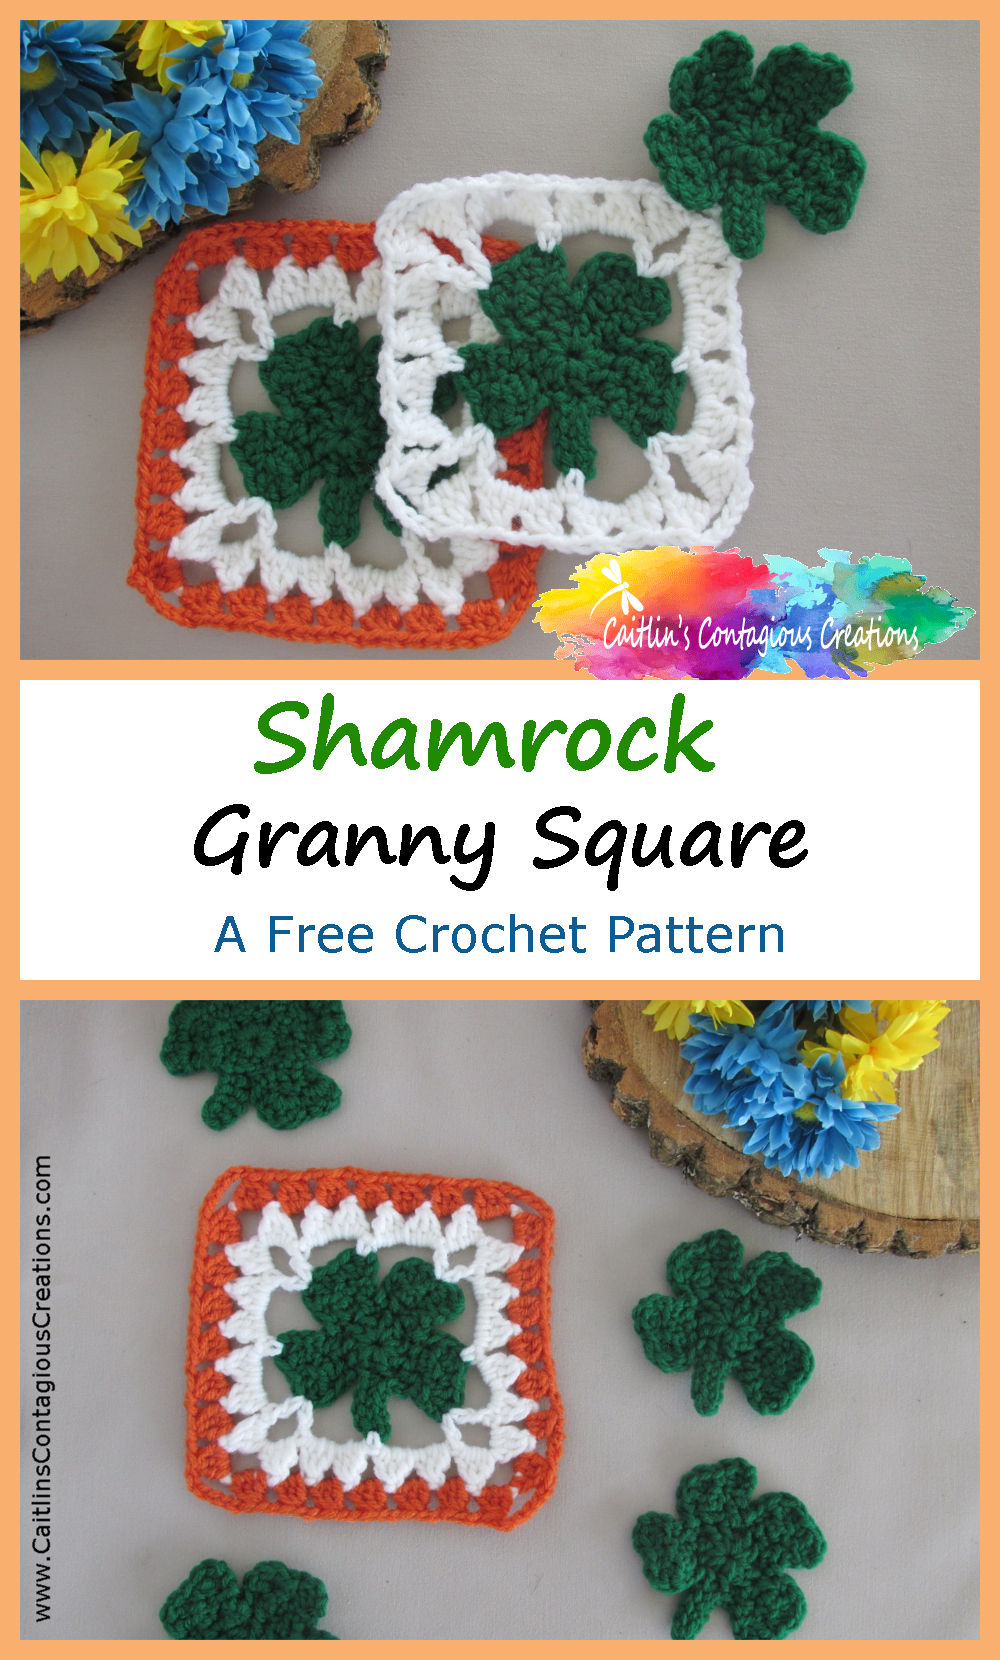 Shamrock Granny Square Crochet Pattern from Caitlin's Contagious Creations. This free and easy four 4 leaf clover crochet design is great for anyone wanting to show a little Irish spirit! This Irish flower afghan square is great as decoration for St Patrick's Day or as a blanket or tablet case all year long! Try it now!